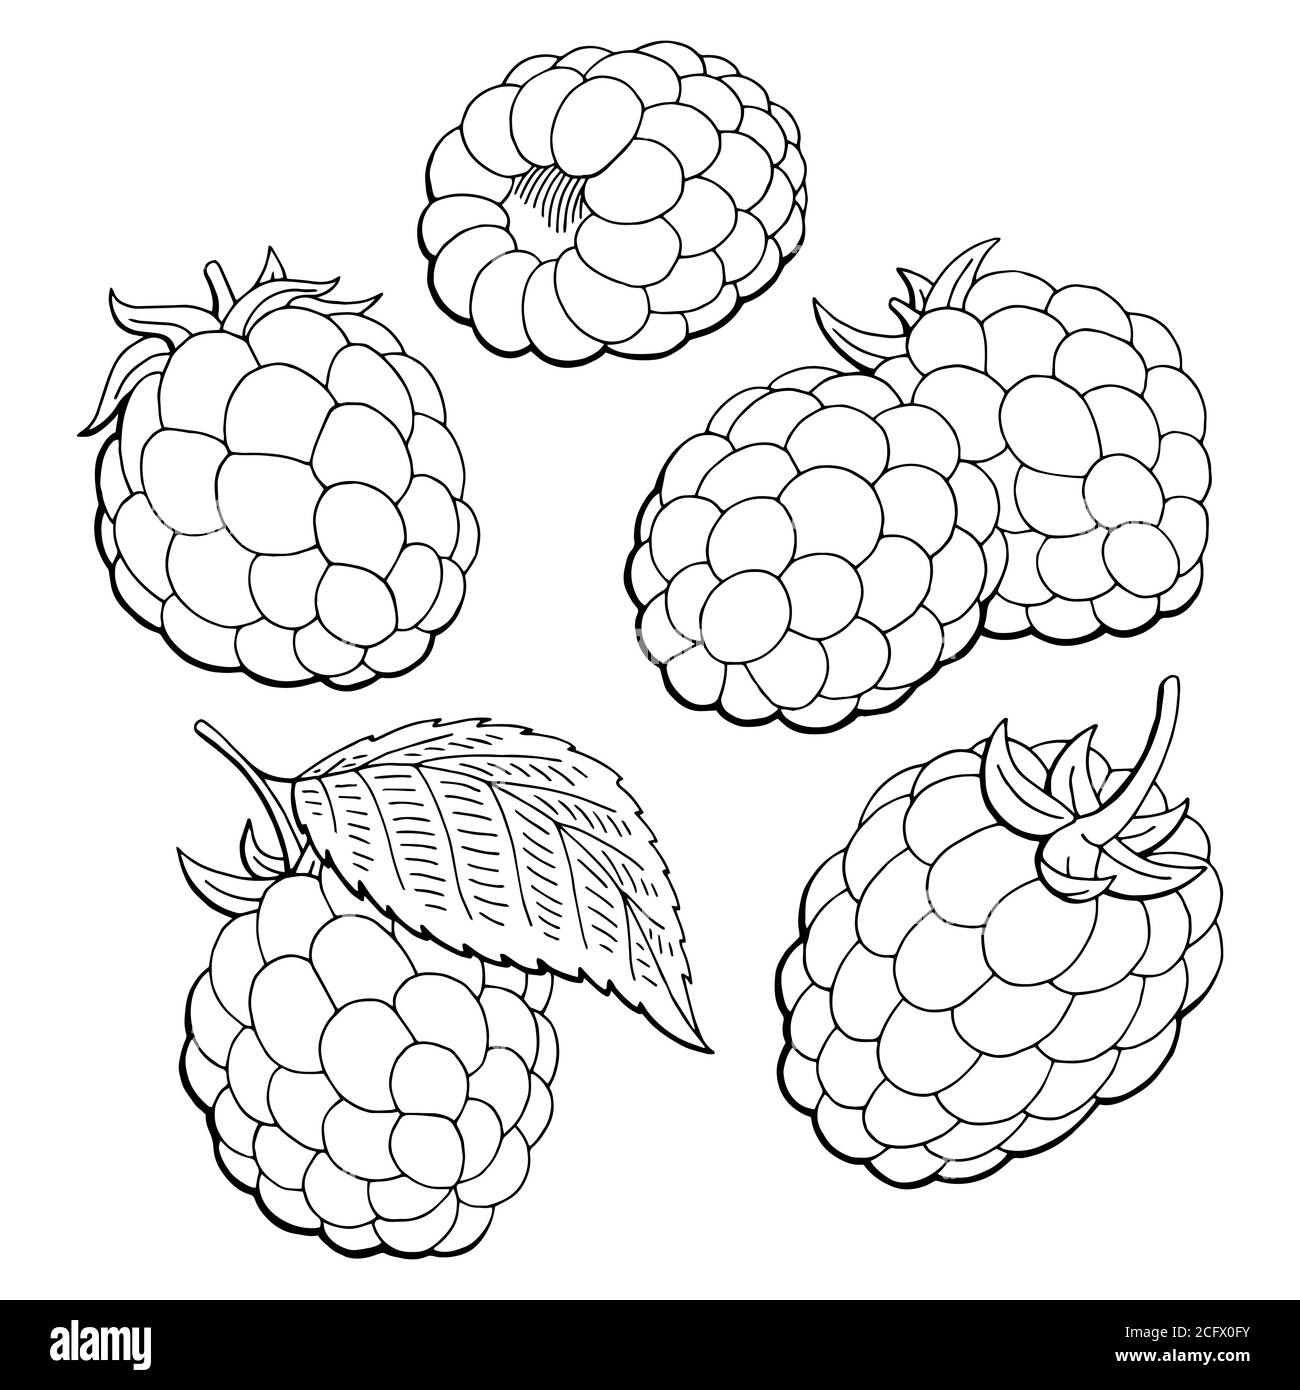 raspberry coloring page